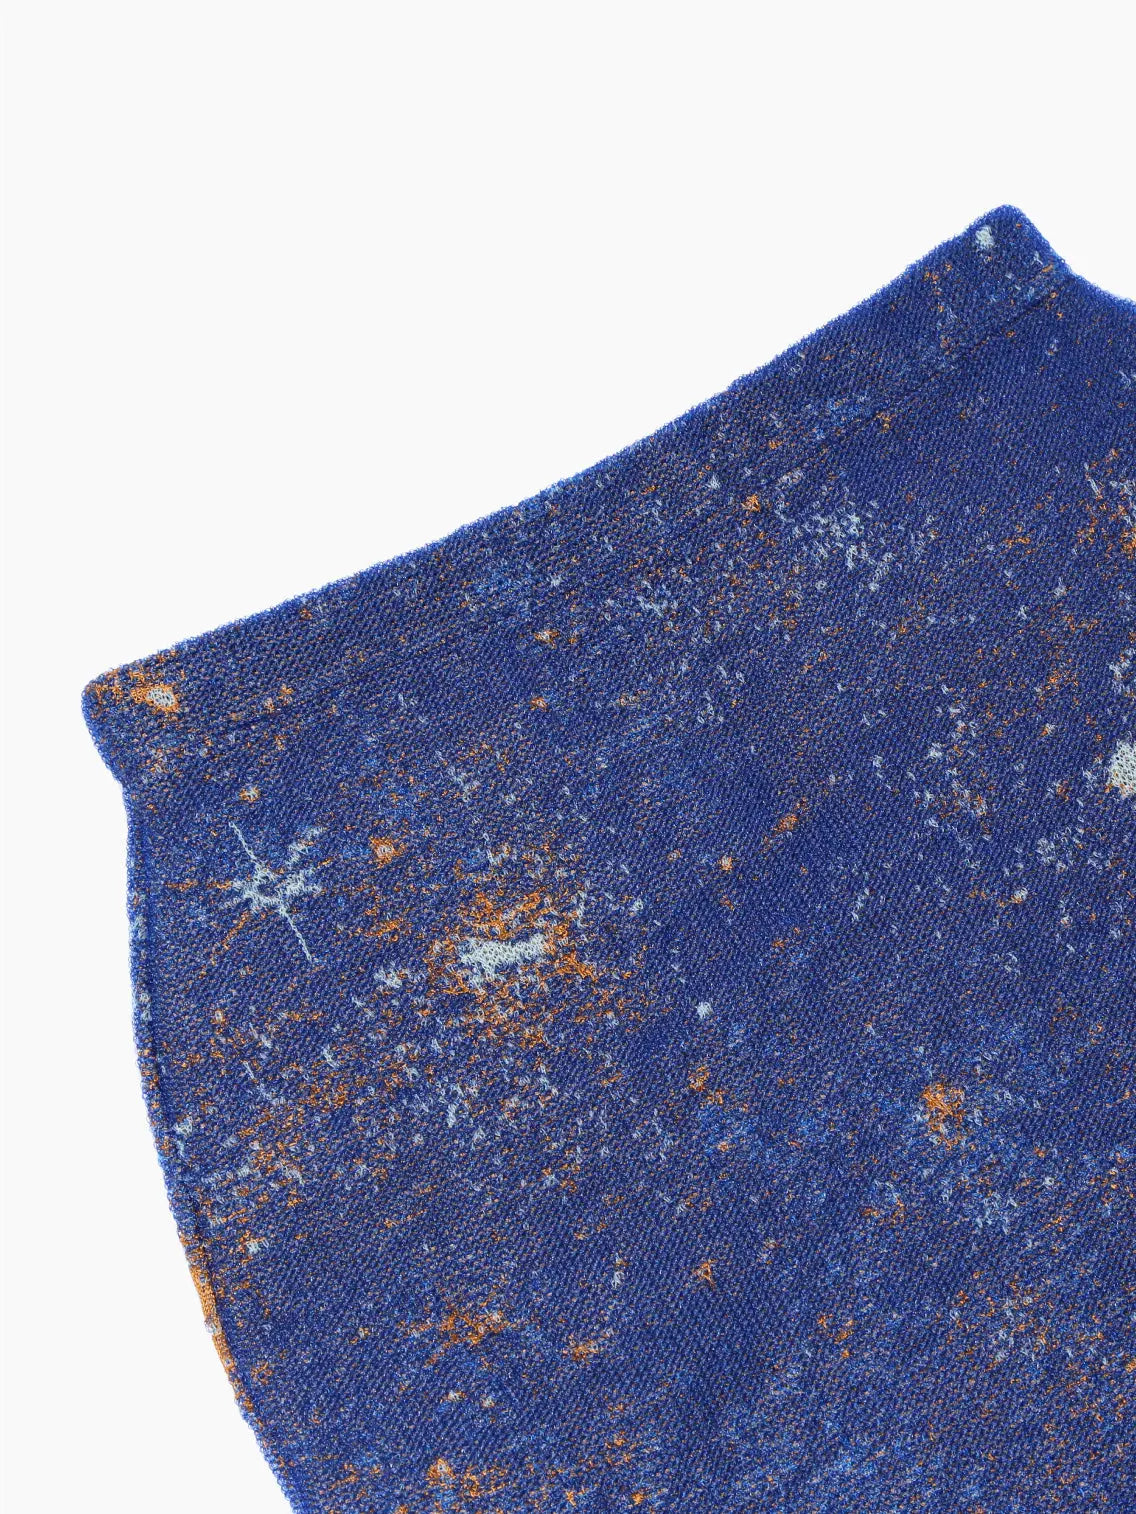 A Bielo Galaxy Skirt Navy, featuring a galaxy-inspired design with blues, oranges, and whites representing stars and cosmic dust on a dark blue background – available exclusively at Bassalstore in Barcelona.